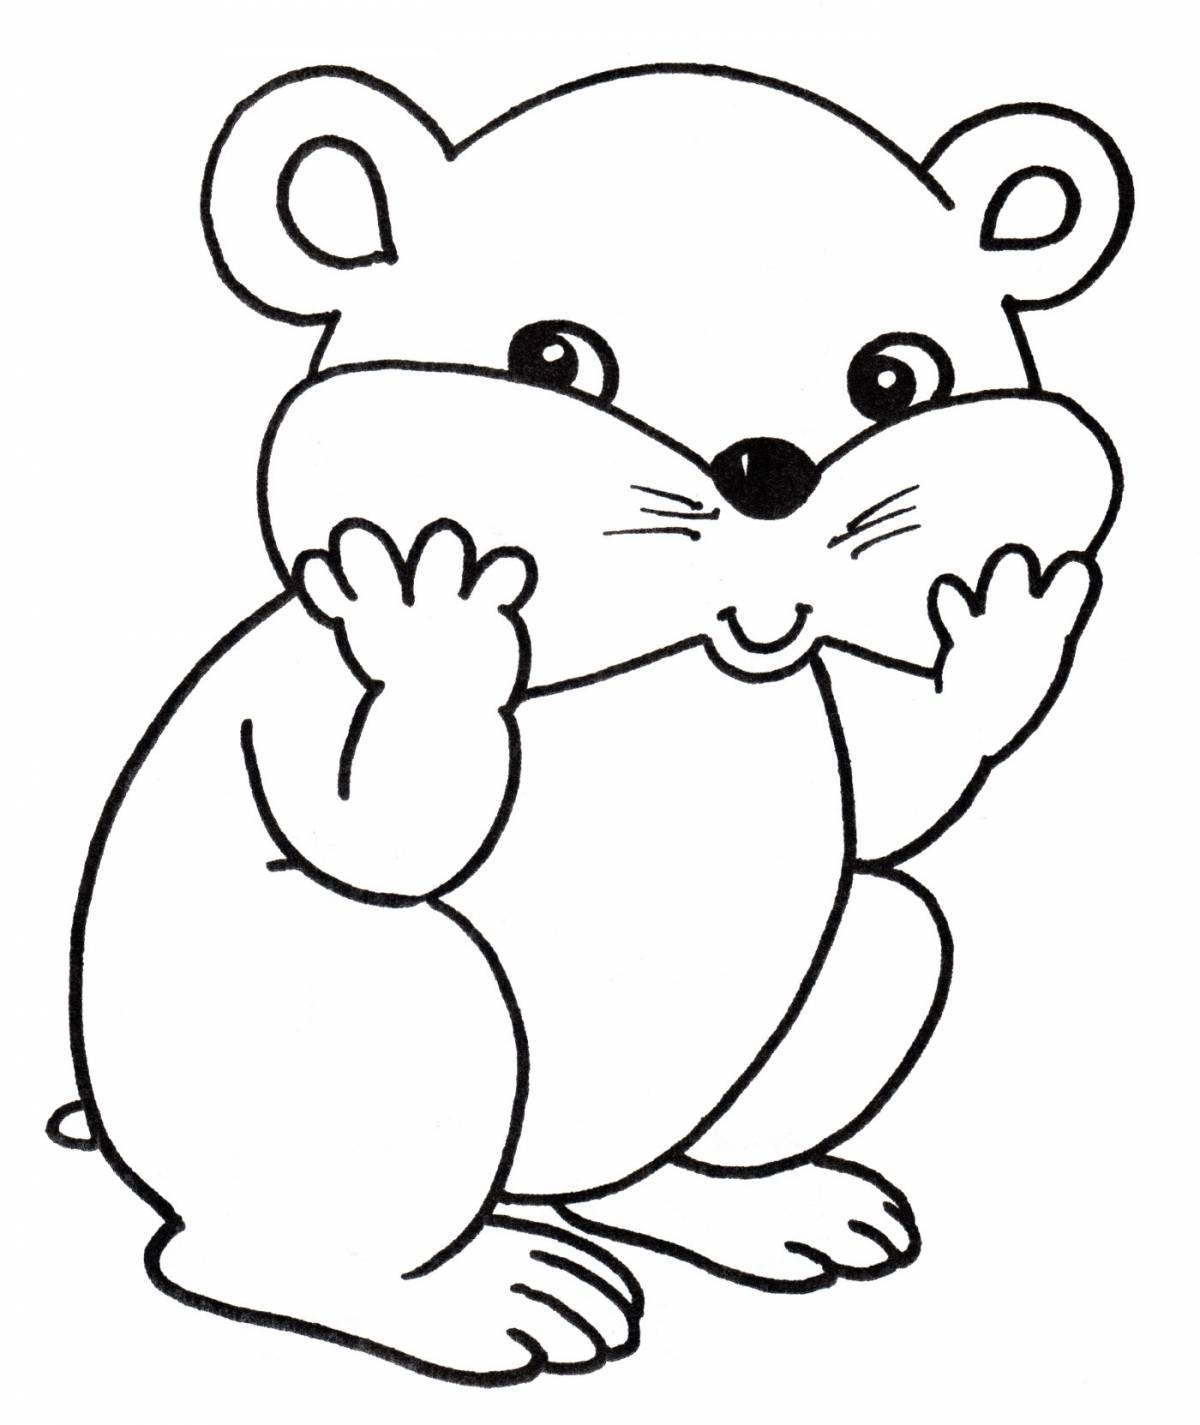 Colouring amiable hamster for kids